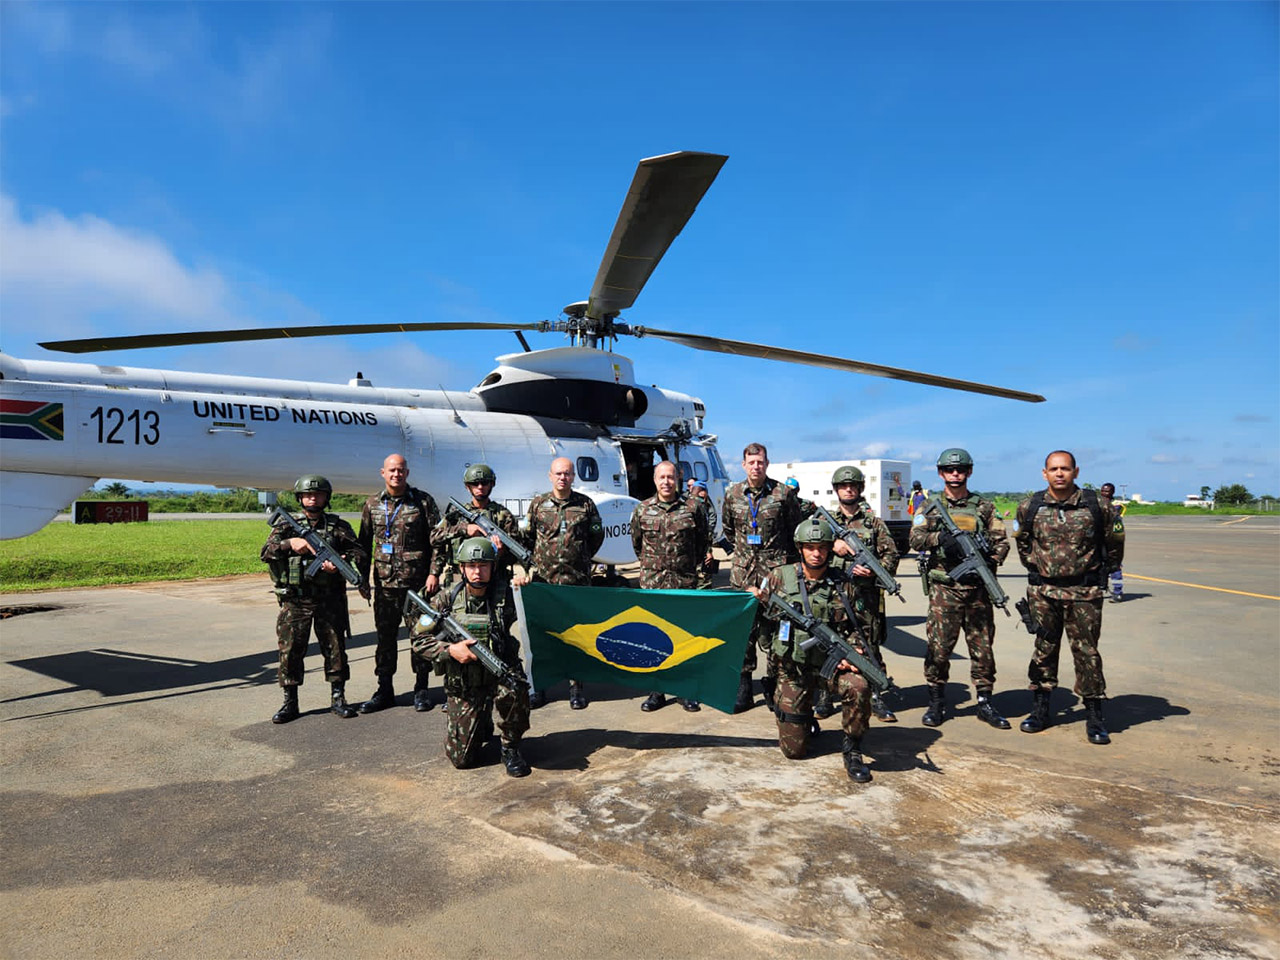 Brazil Once Again Leads UN Peacekeeping Mission in Congo